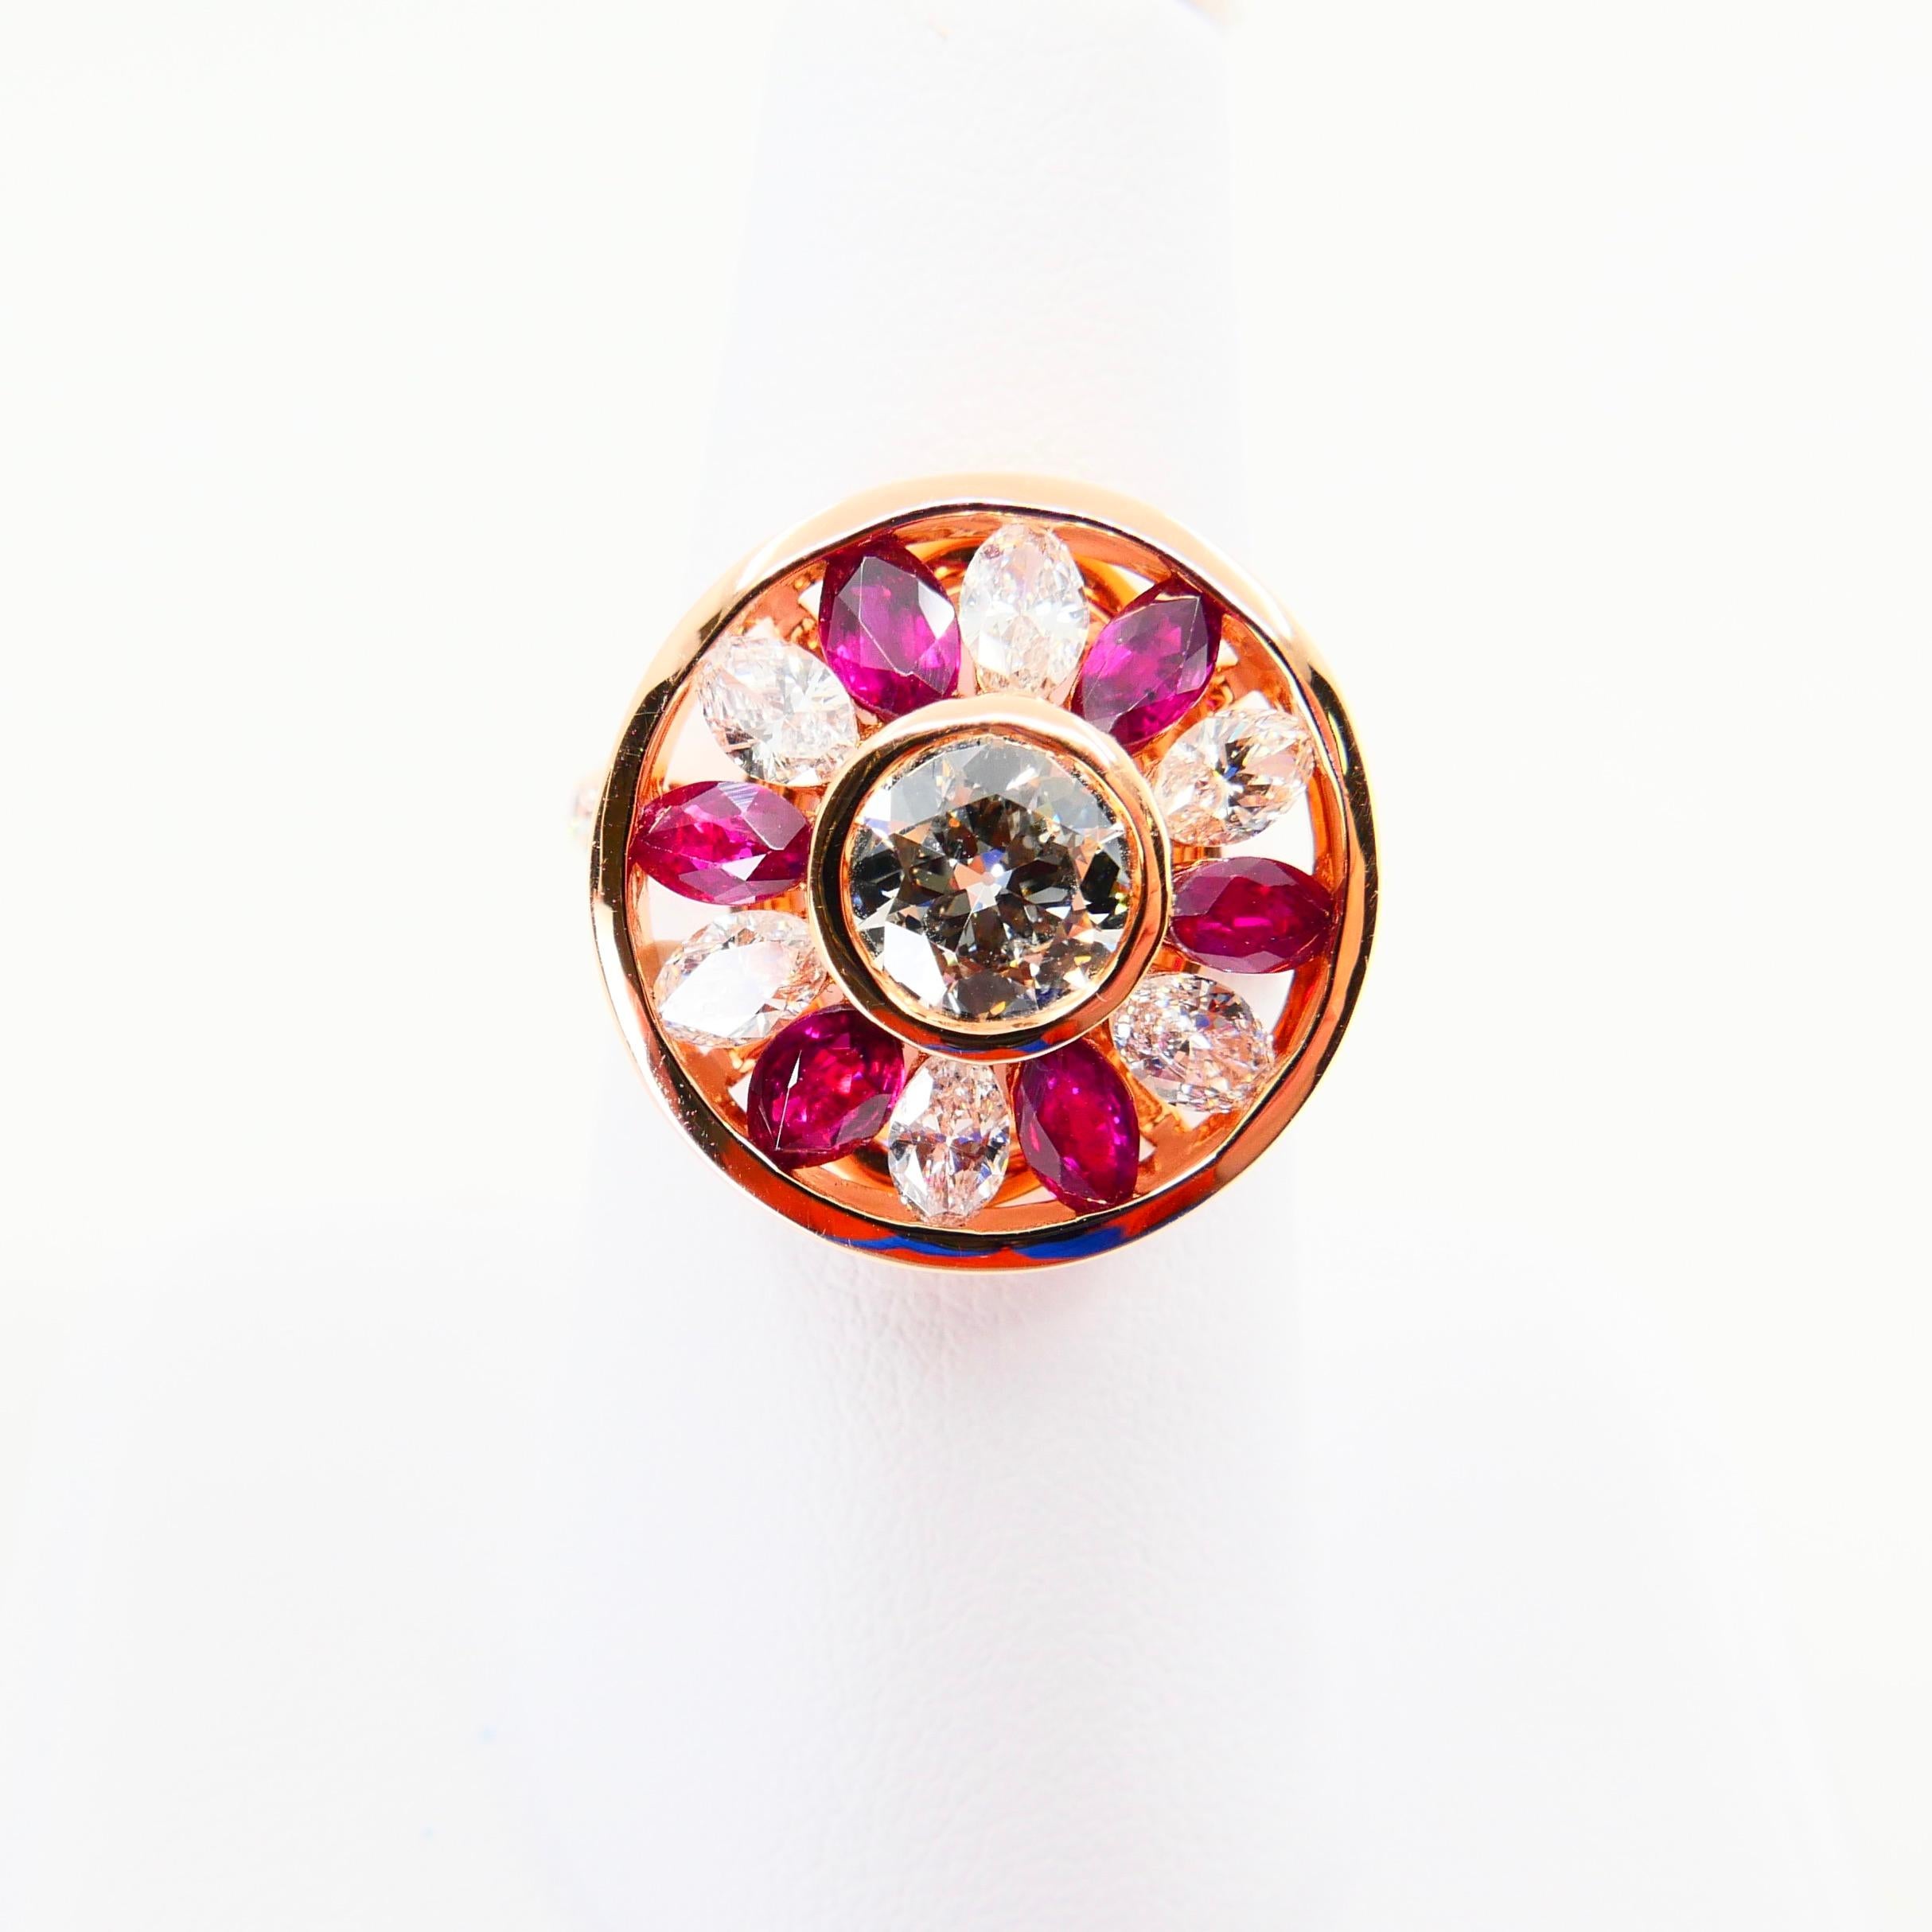 Certified 1.53 Cts Natural Burma Ruby & Old Cut Diamond Ring, 18K Rose Gold 5